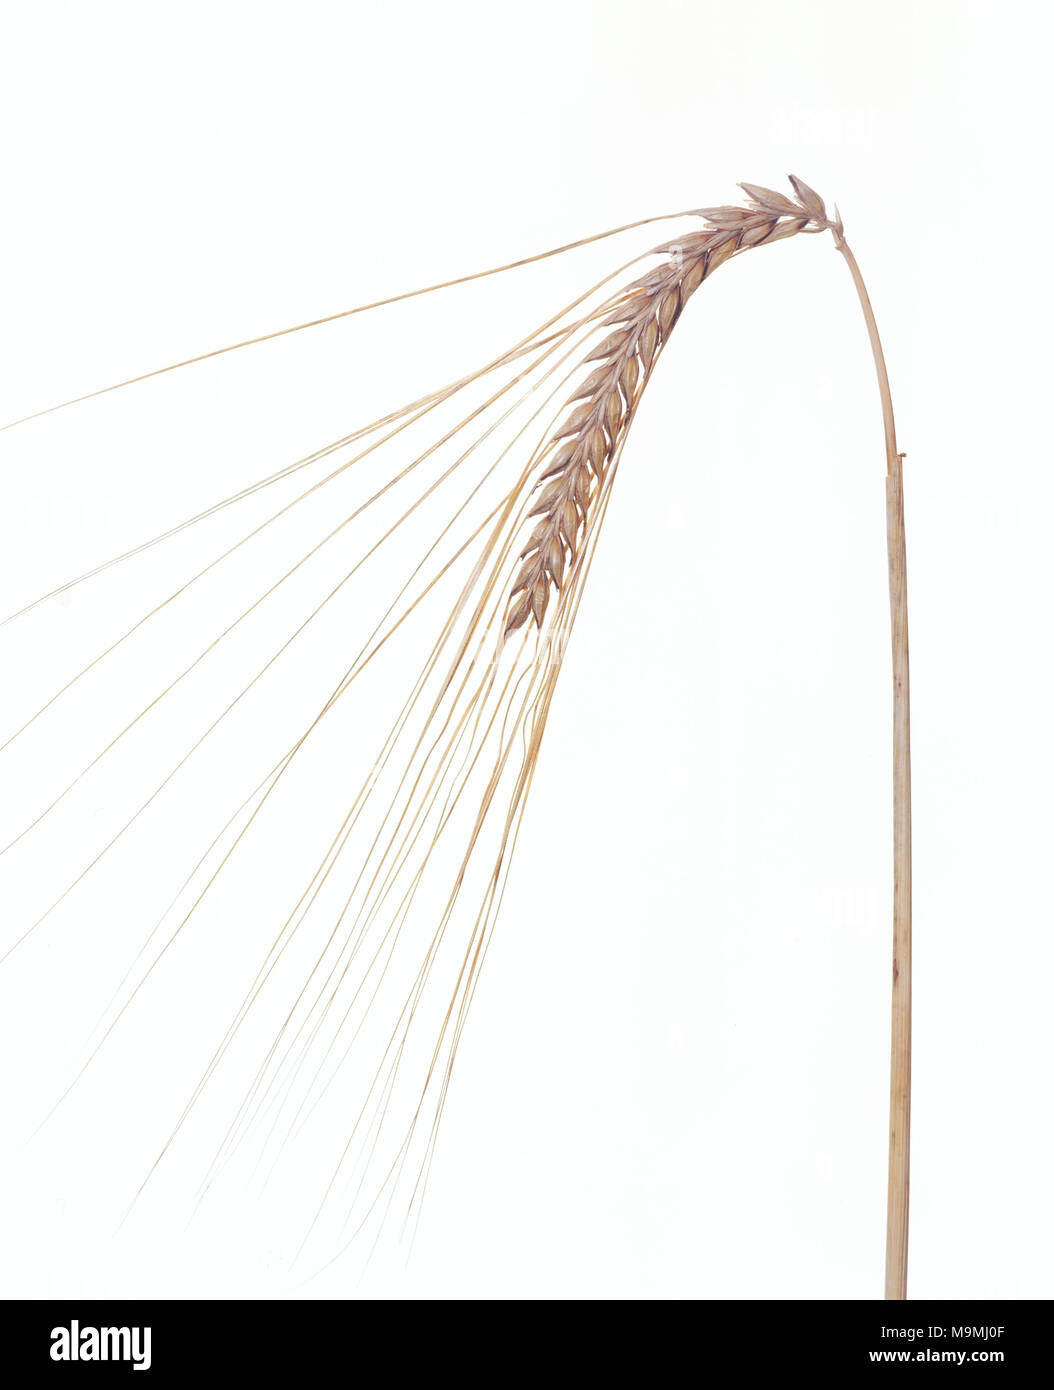 Barley (Hordeum vulgare), ripe ear. Studio picture against a whote background. Germany Stock Photo